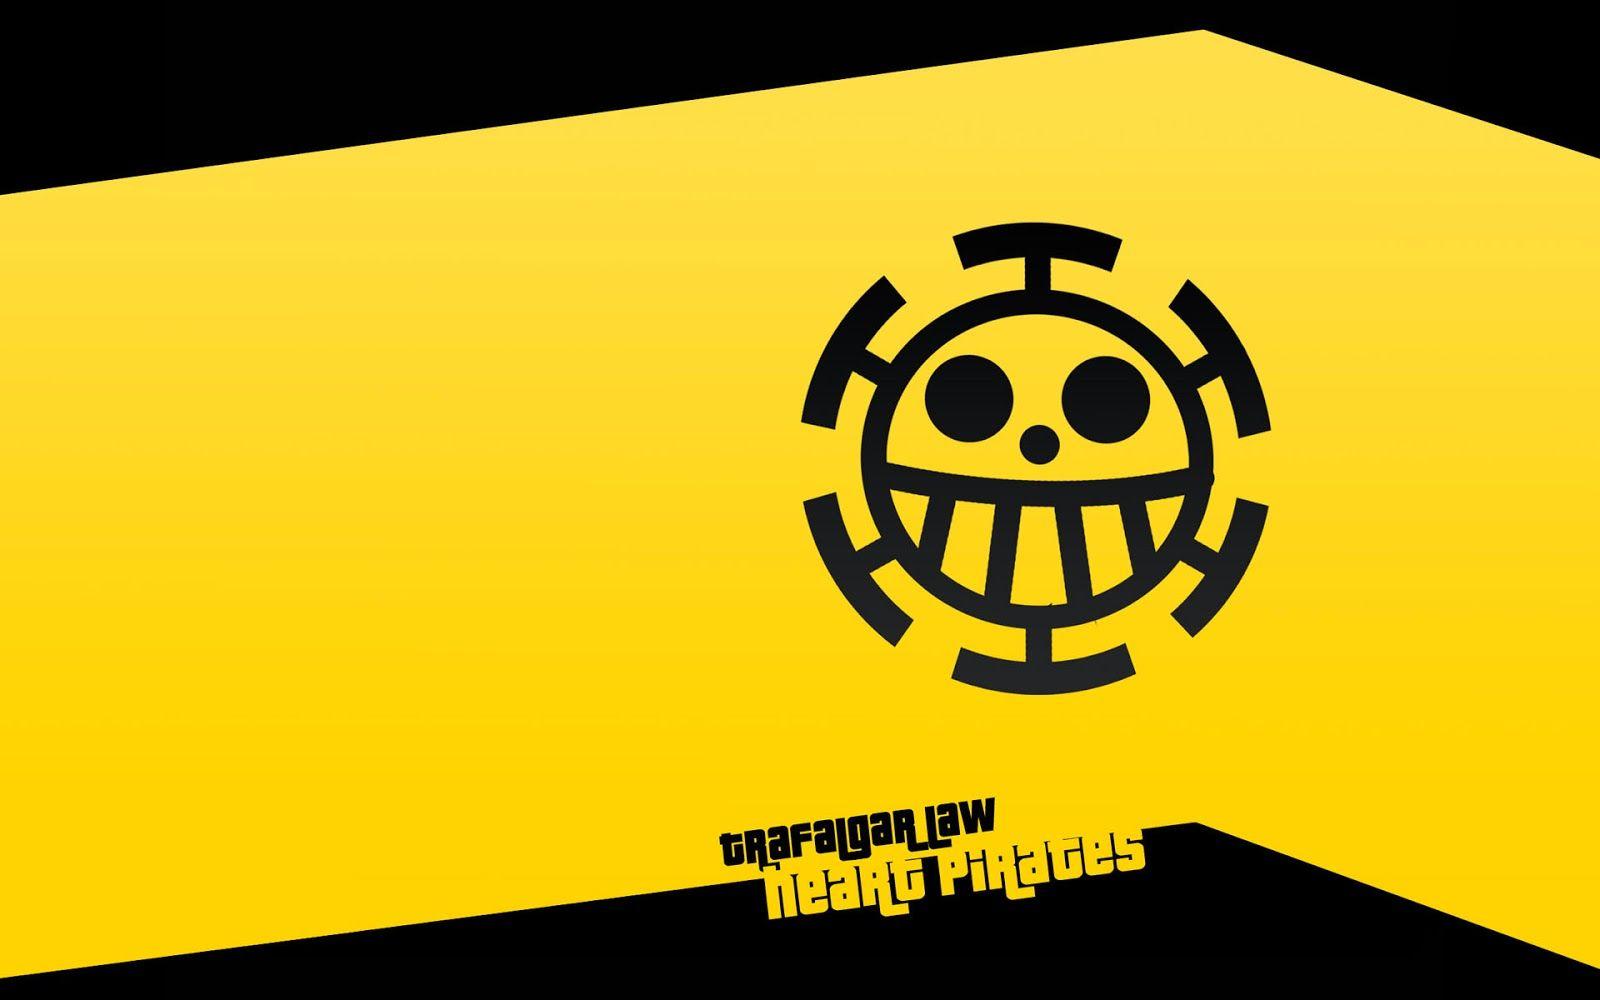 Amazing “One Piece” logos: Meaning, backstory, and design | ZenBusiness